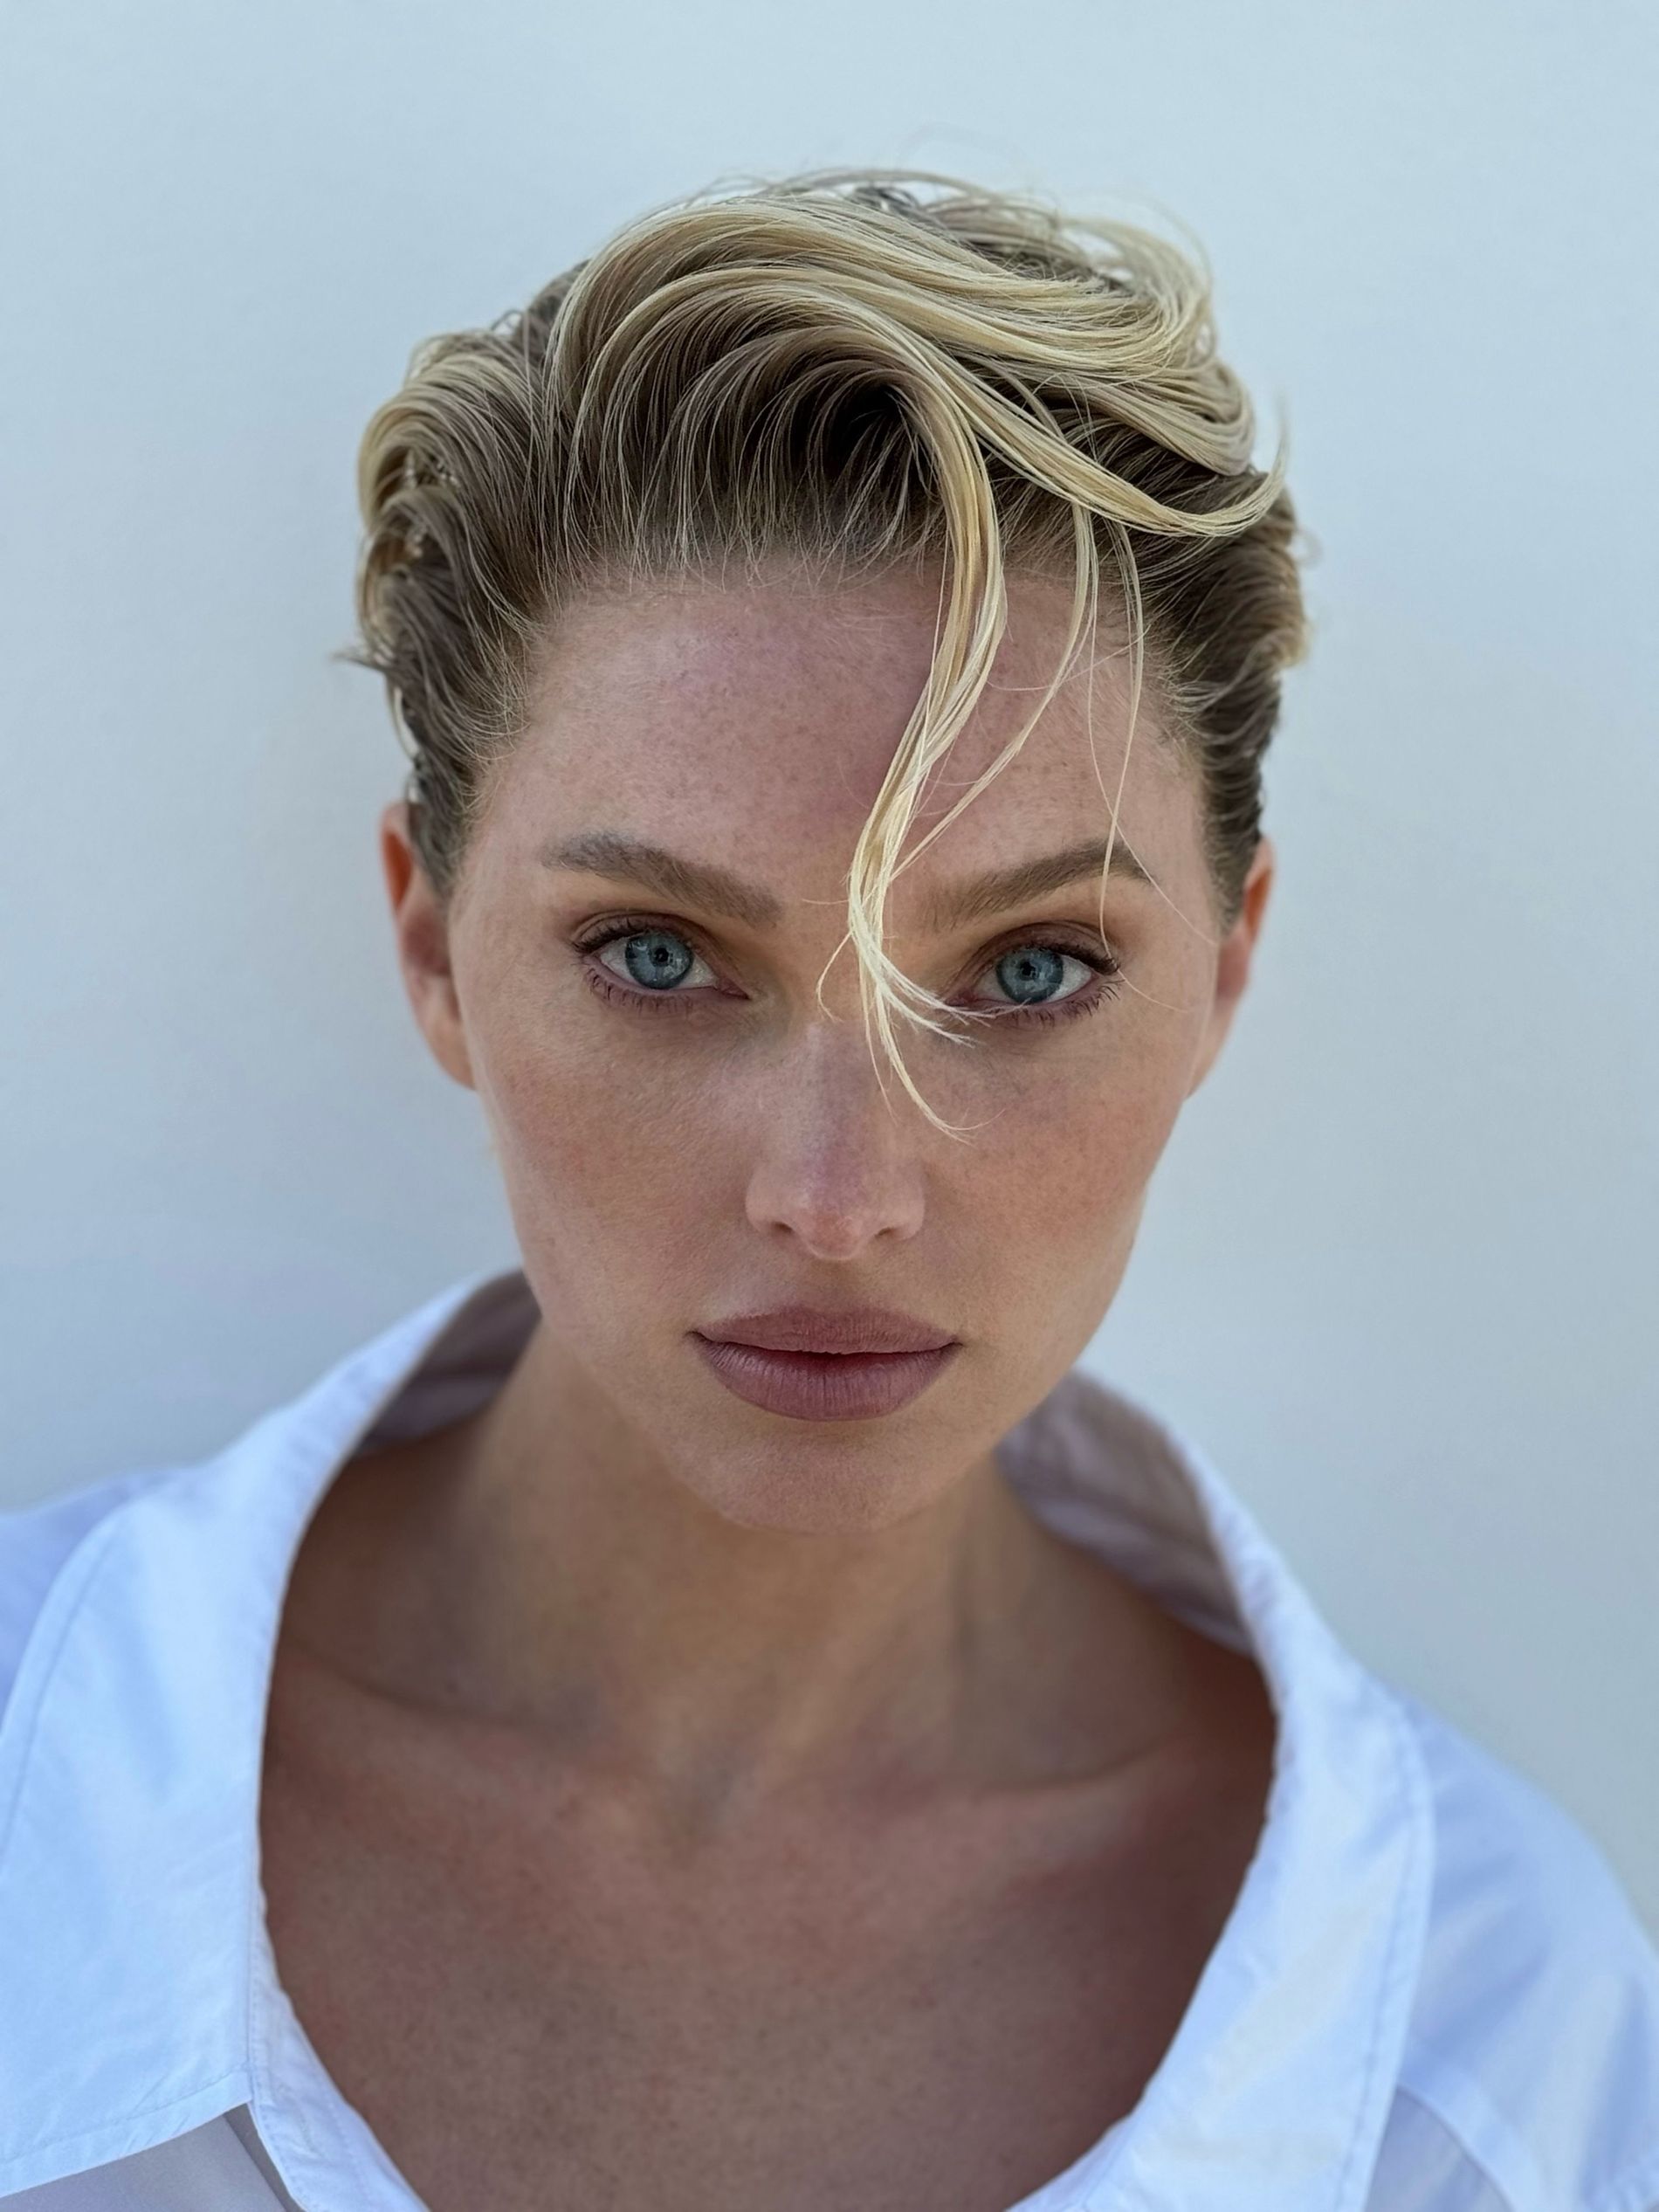 Elsa Hosk faces the camera, showing off her new short hair cut